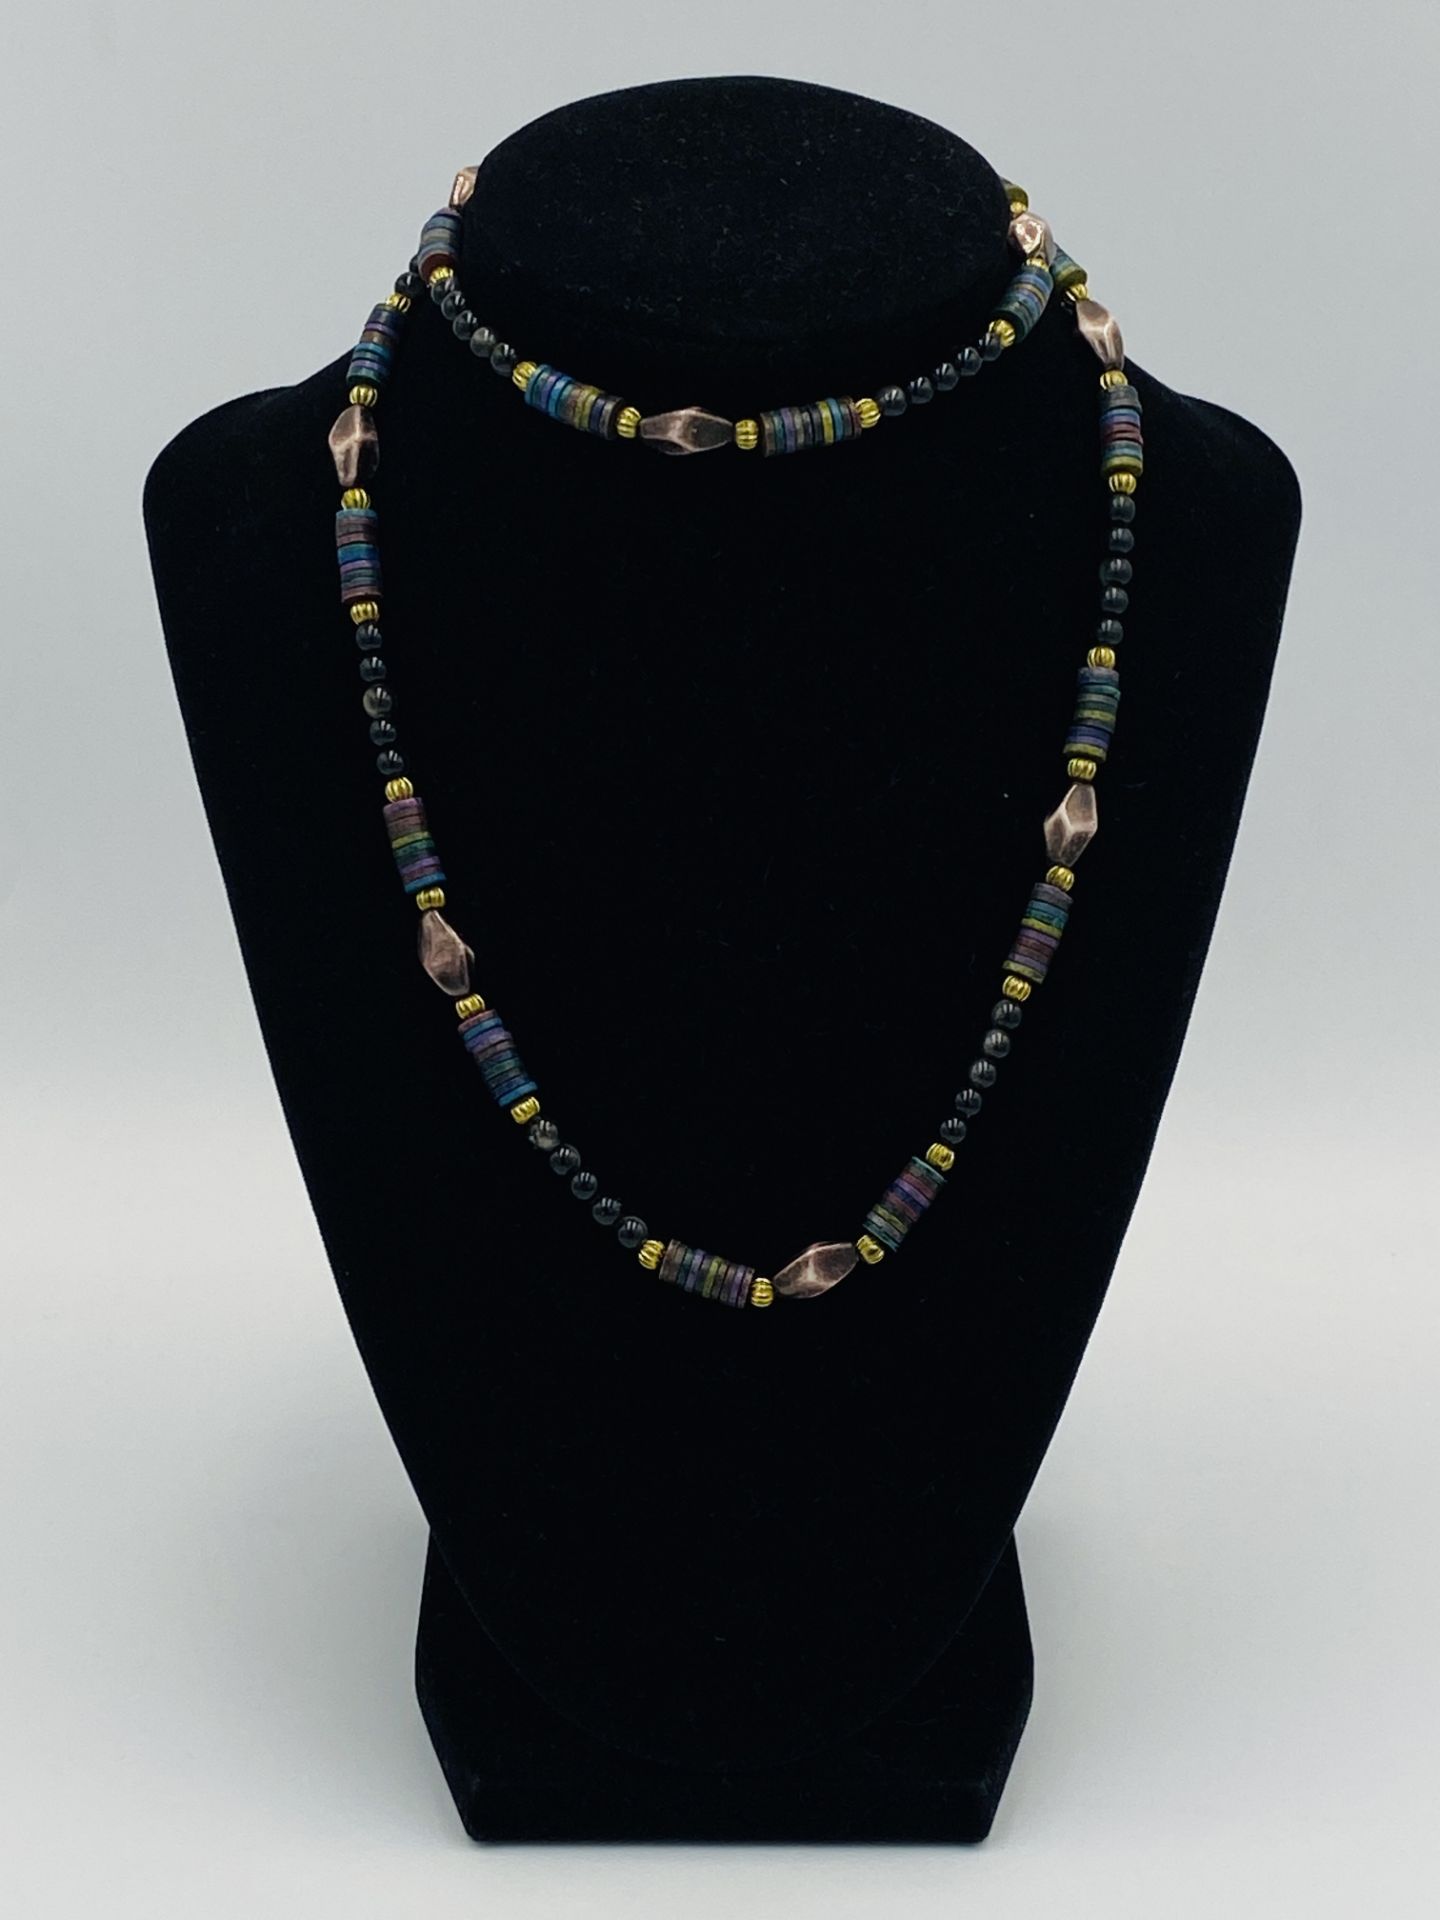 Four agate bead necklaces - Image 5 of 6